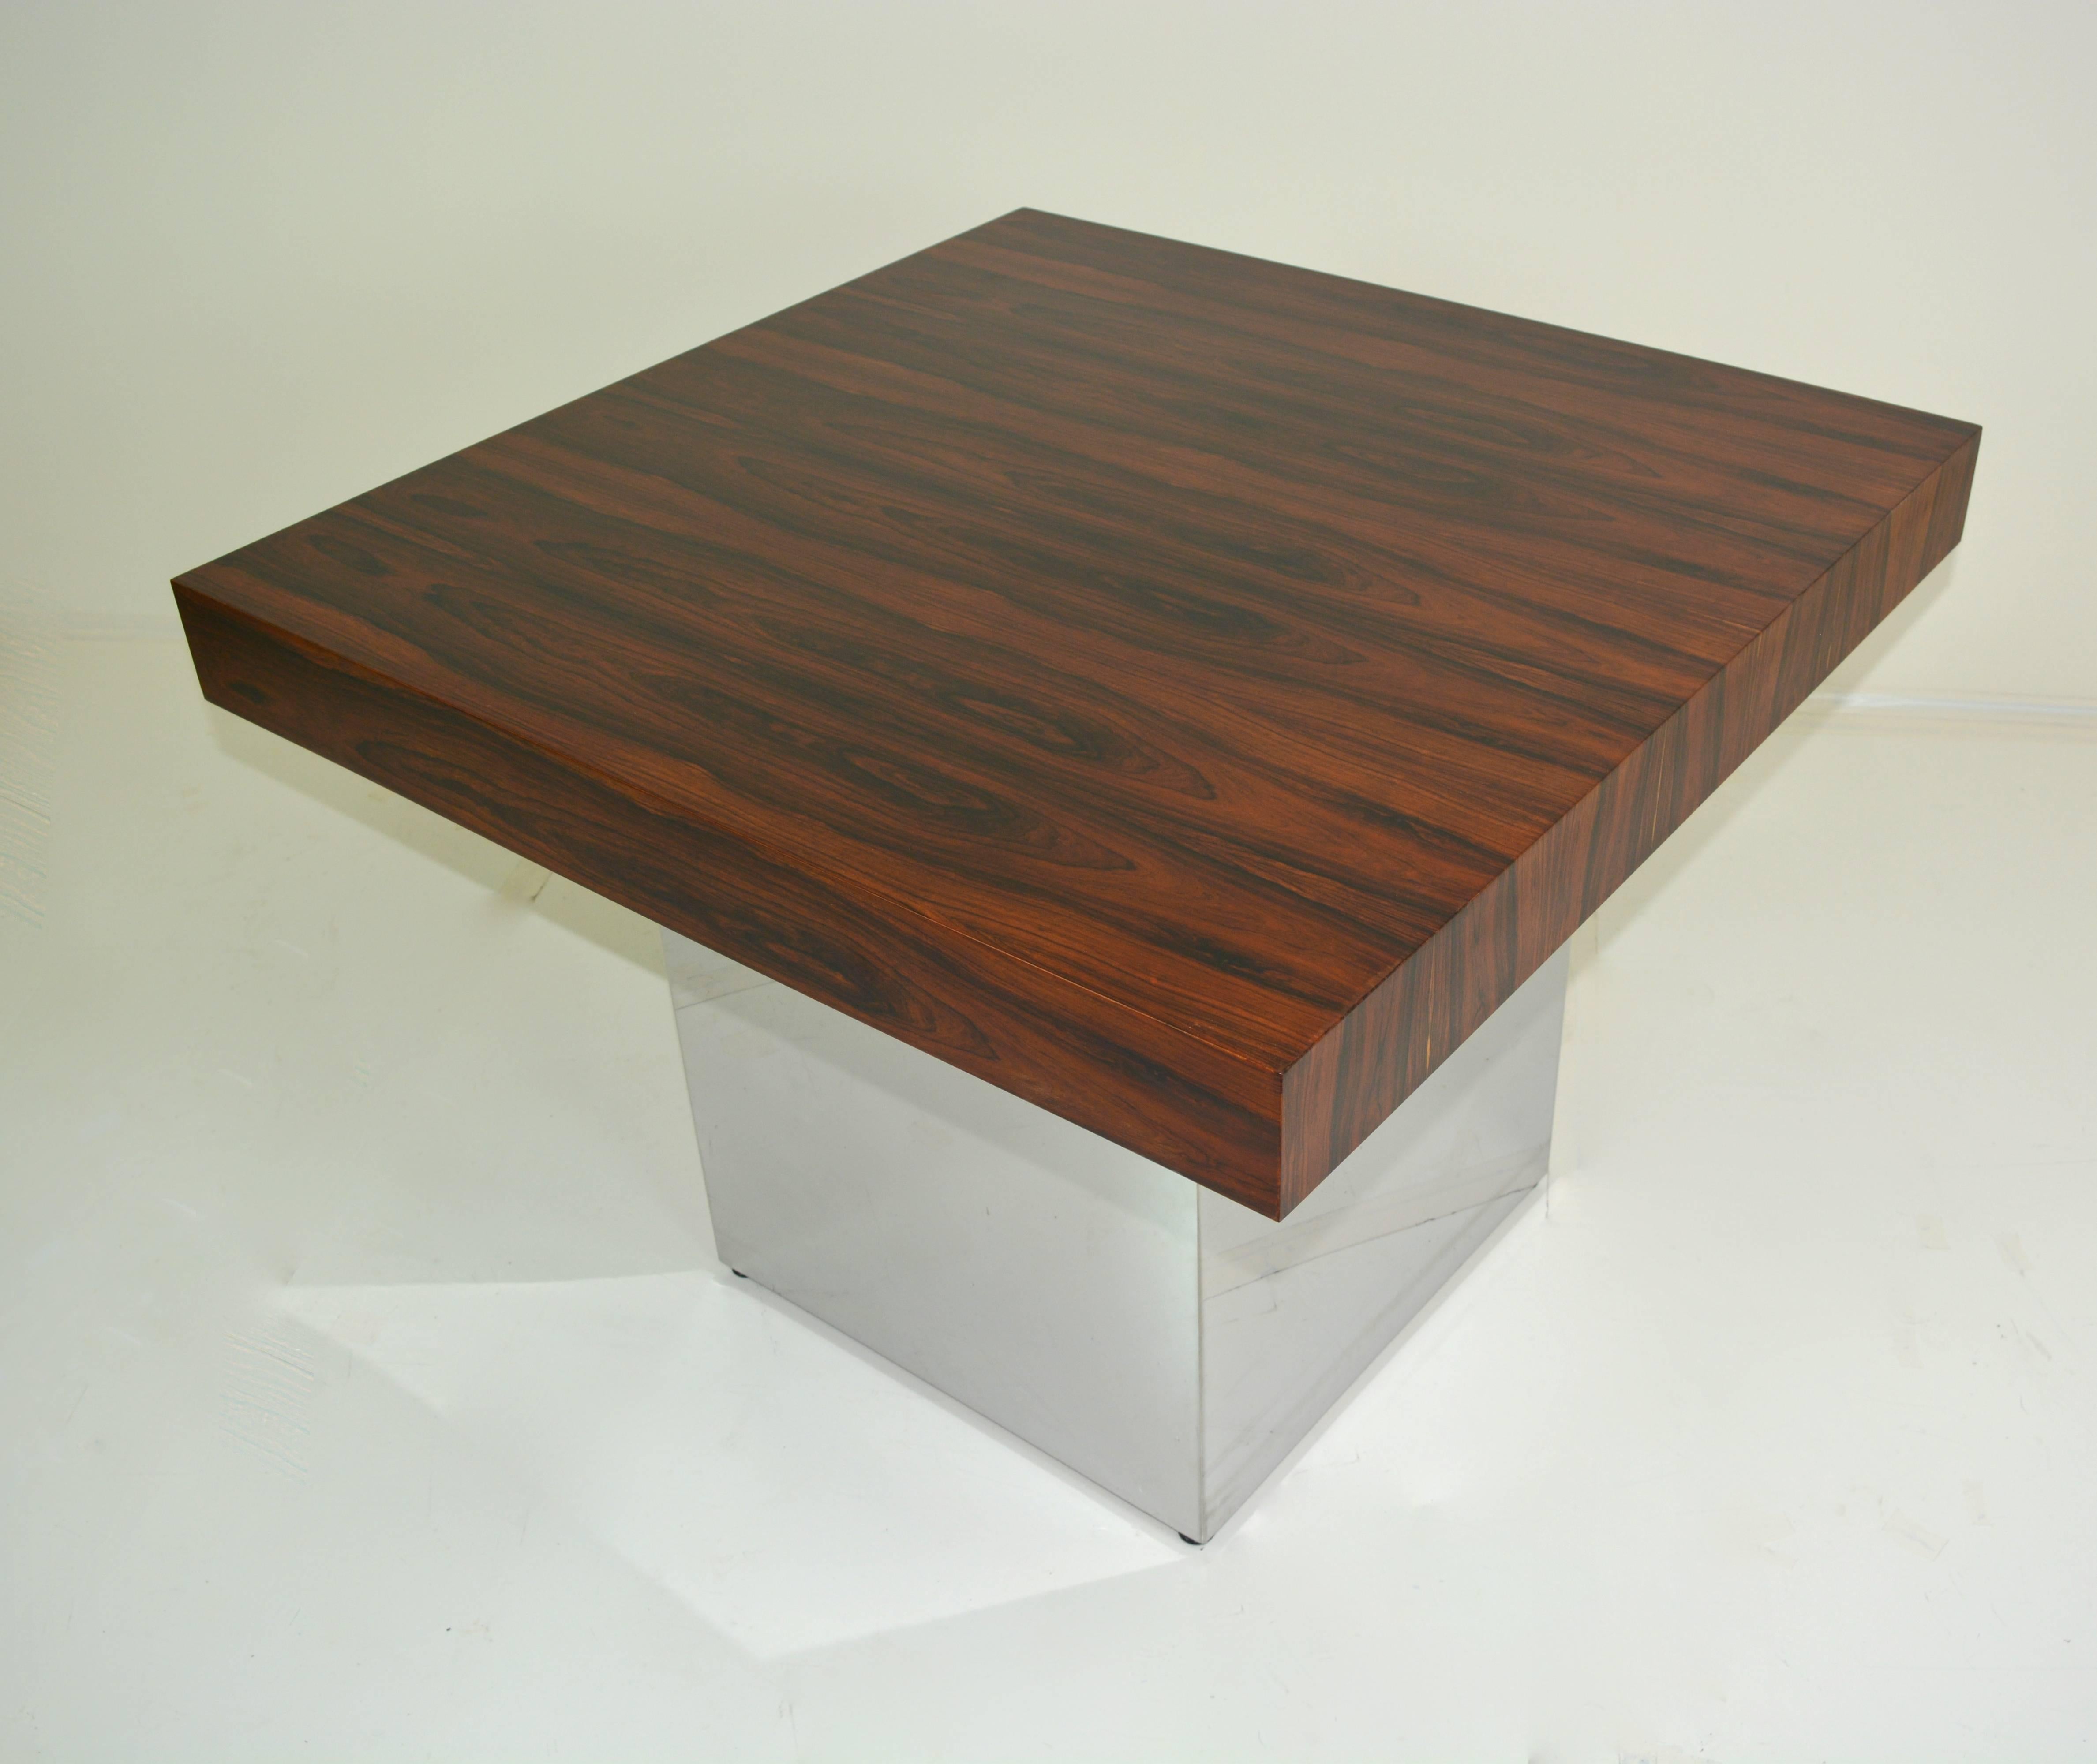 Rare rosewood and chrome table by Milo Baughman. Excellent refinished condition, circa 1960s. Measures: 36